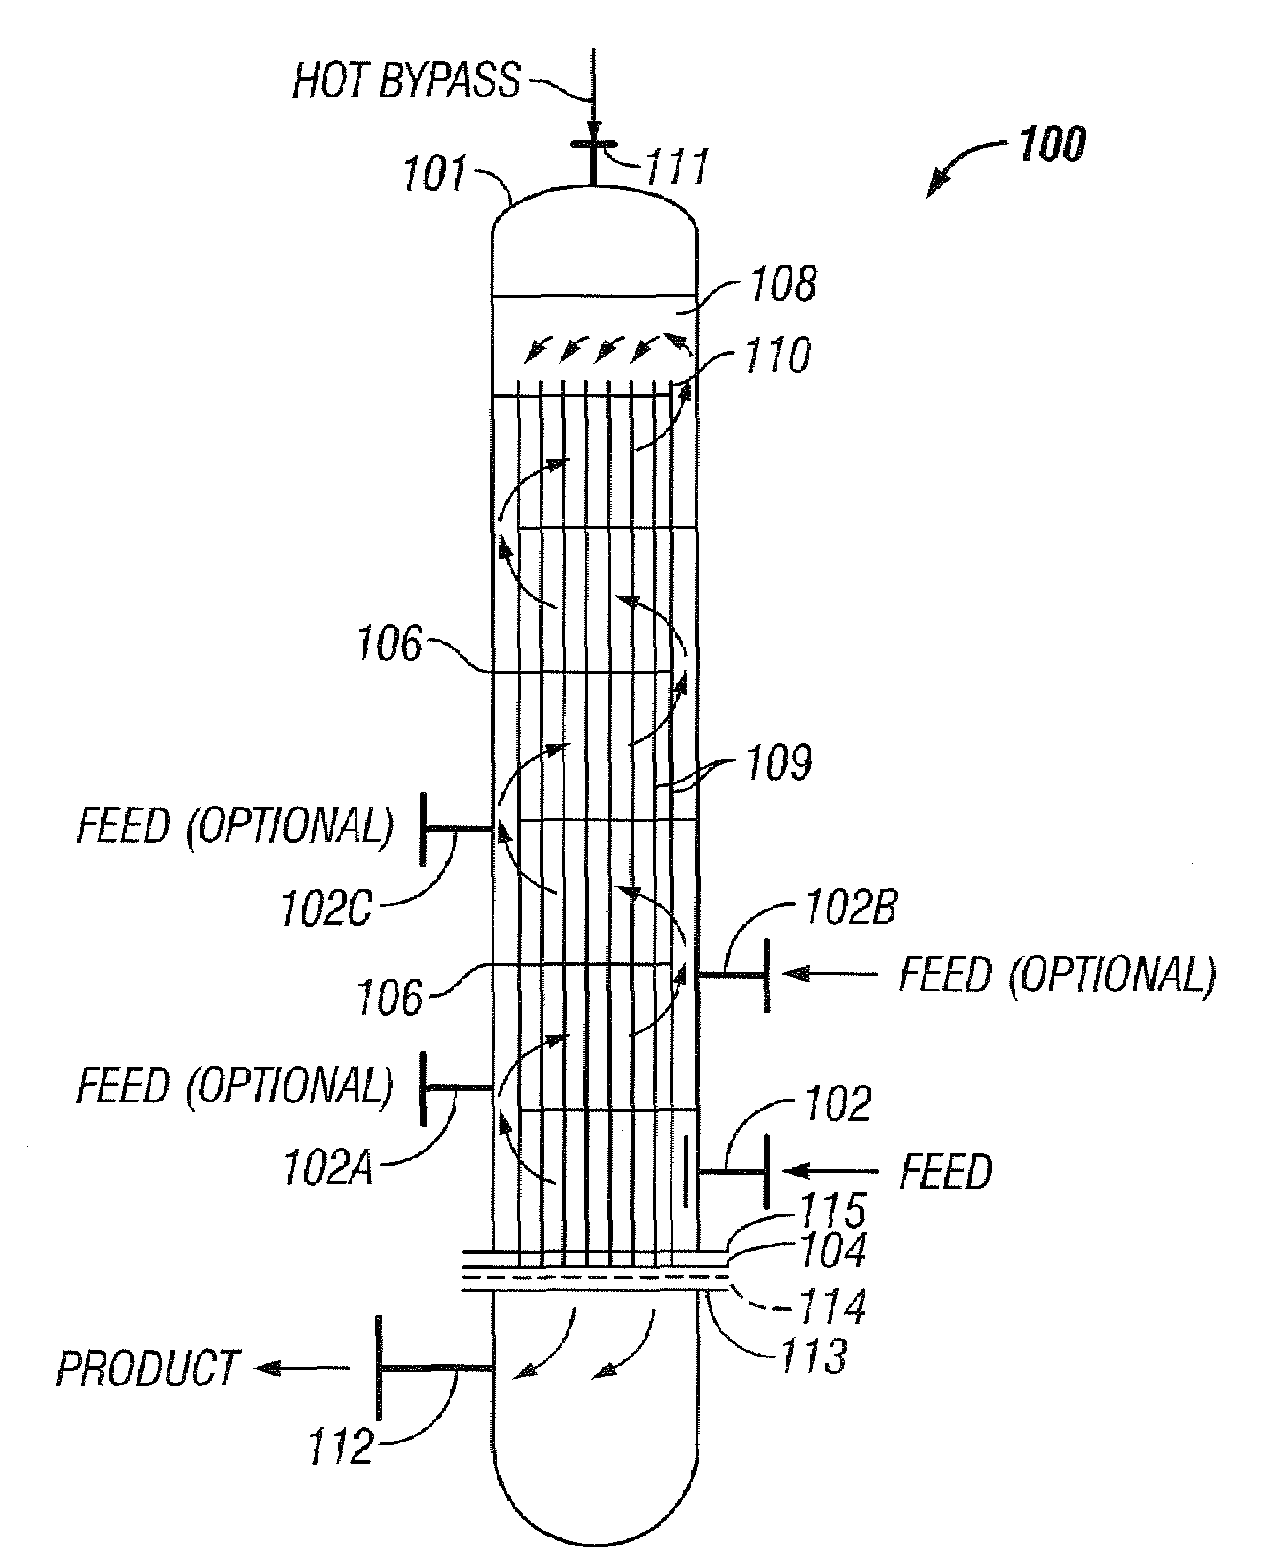 Maximum reaction rate converter system for exothermic reactions